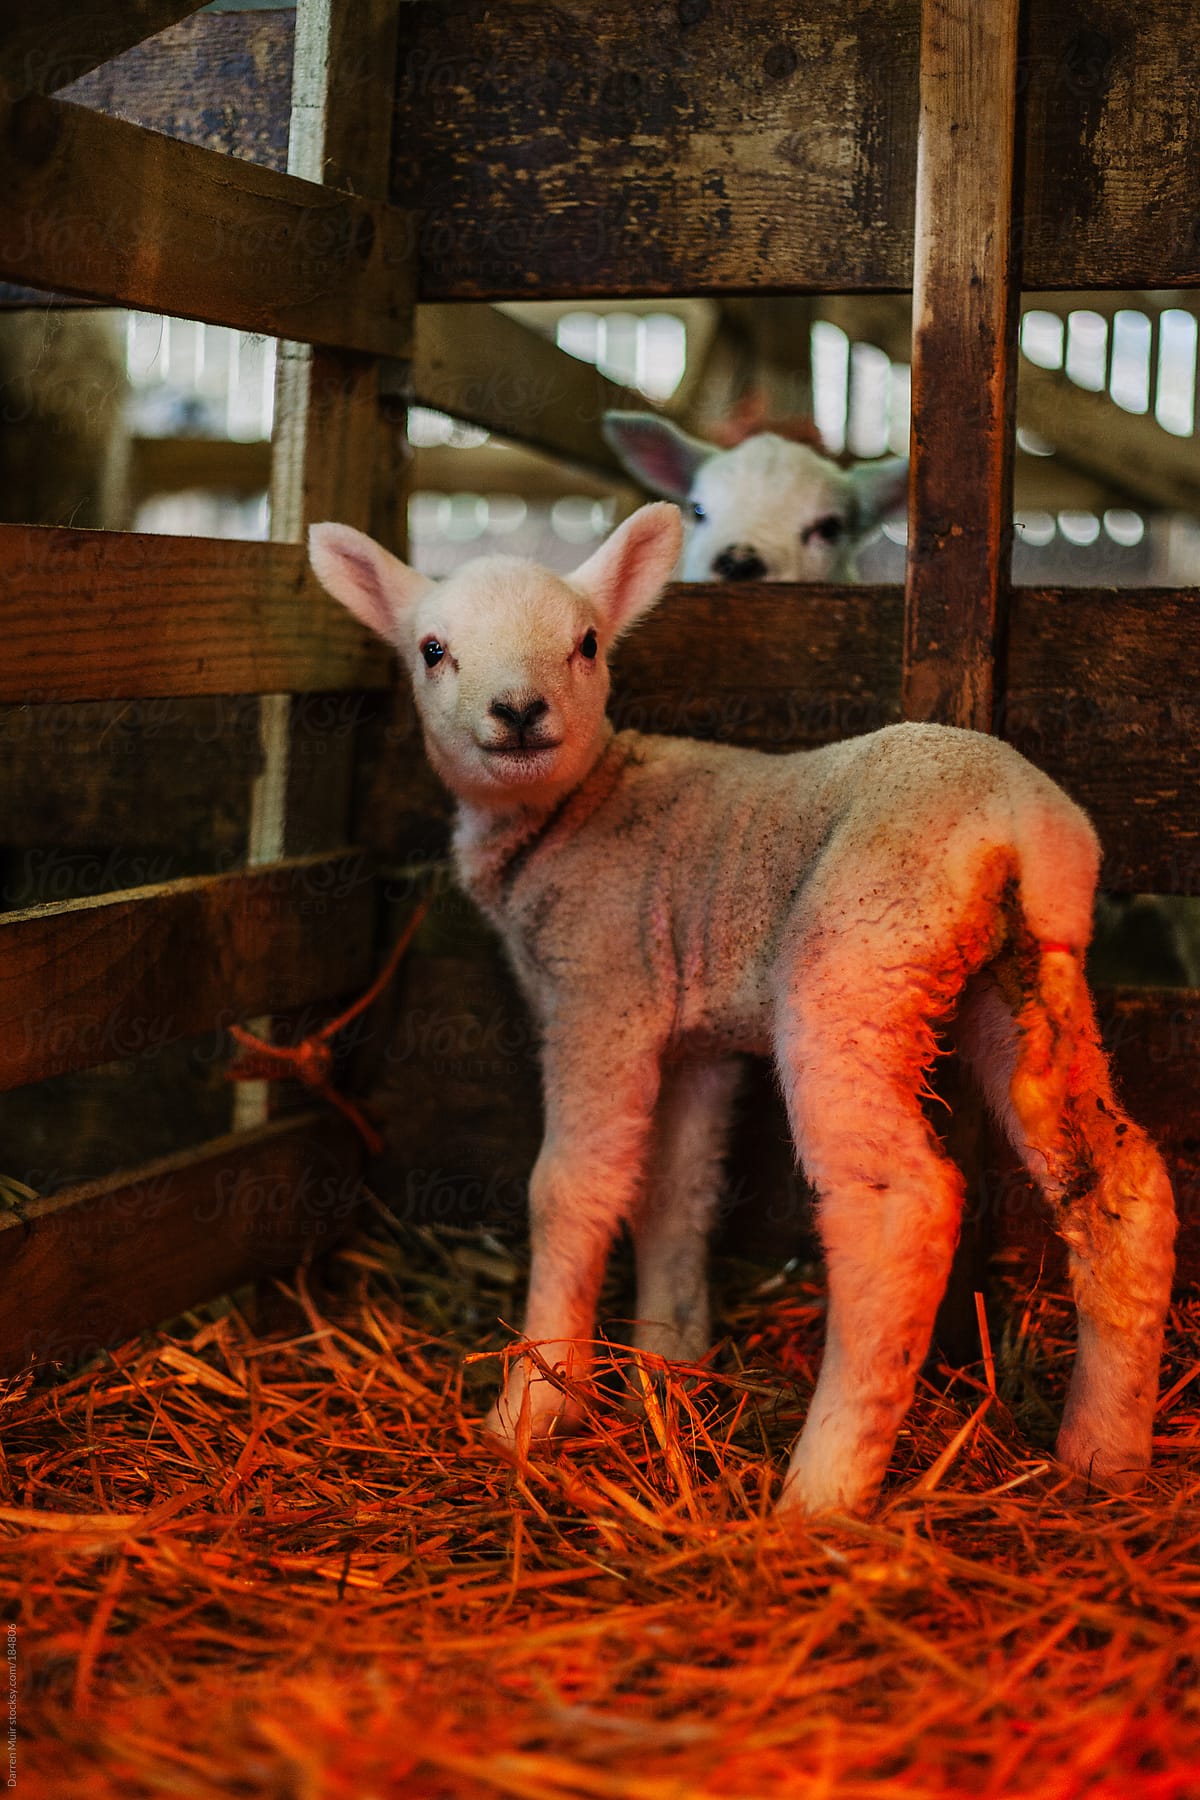 Two day old lamb.